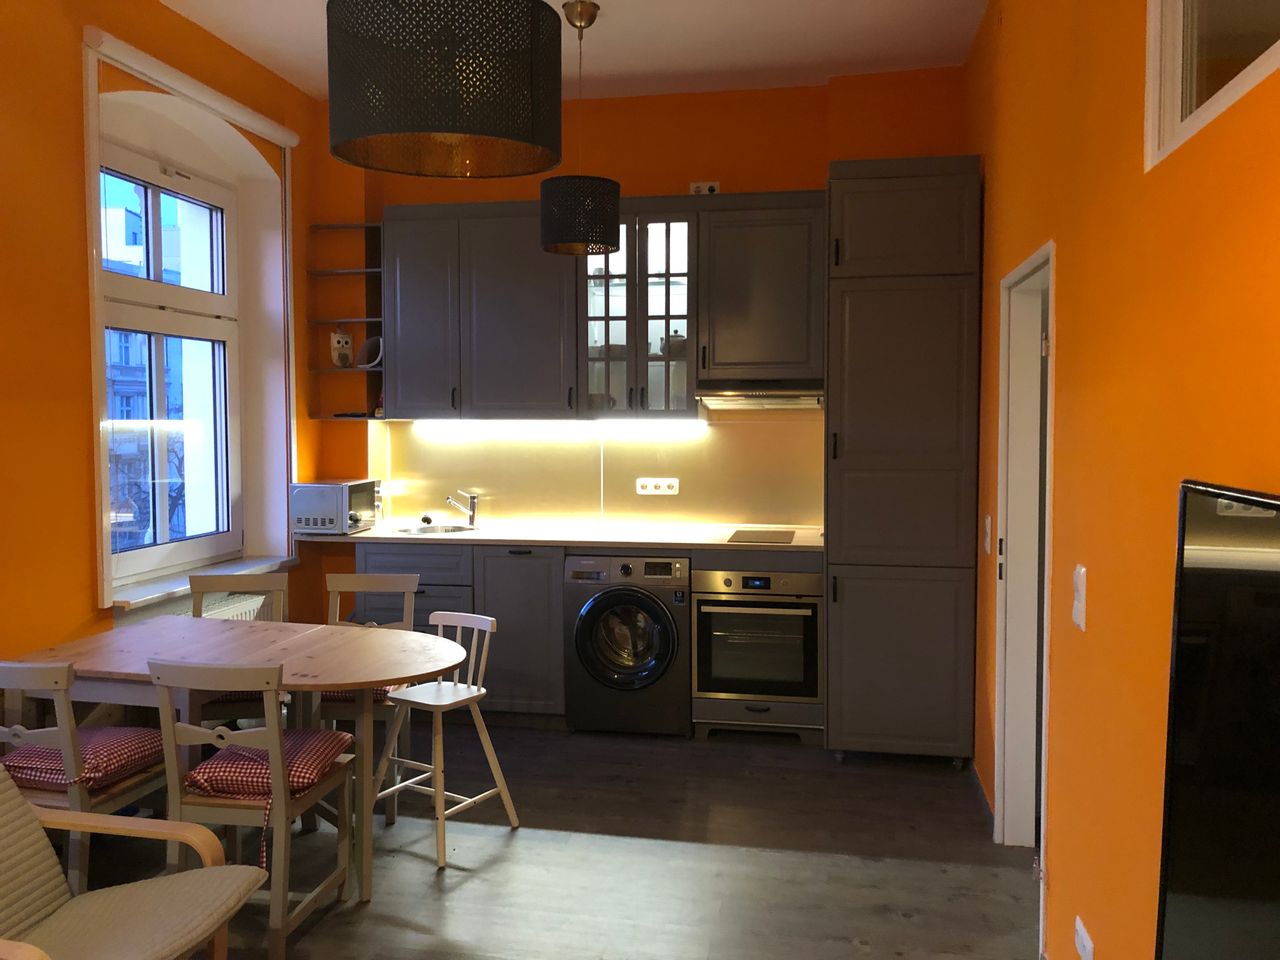 Fully furnished 2-room apartment with optional children's room or bedroom in Charlottenburg